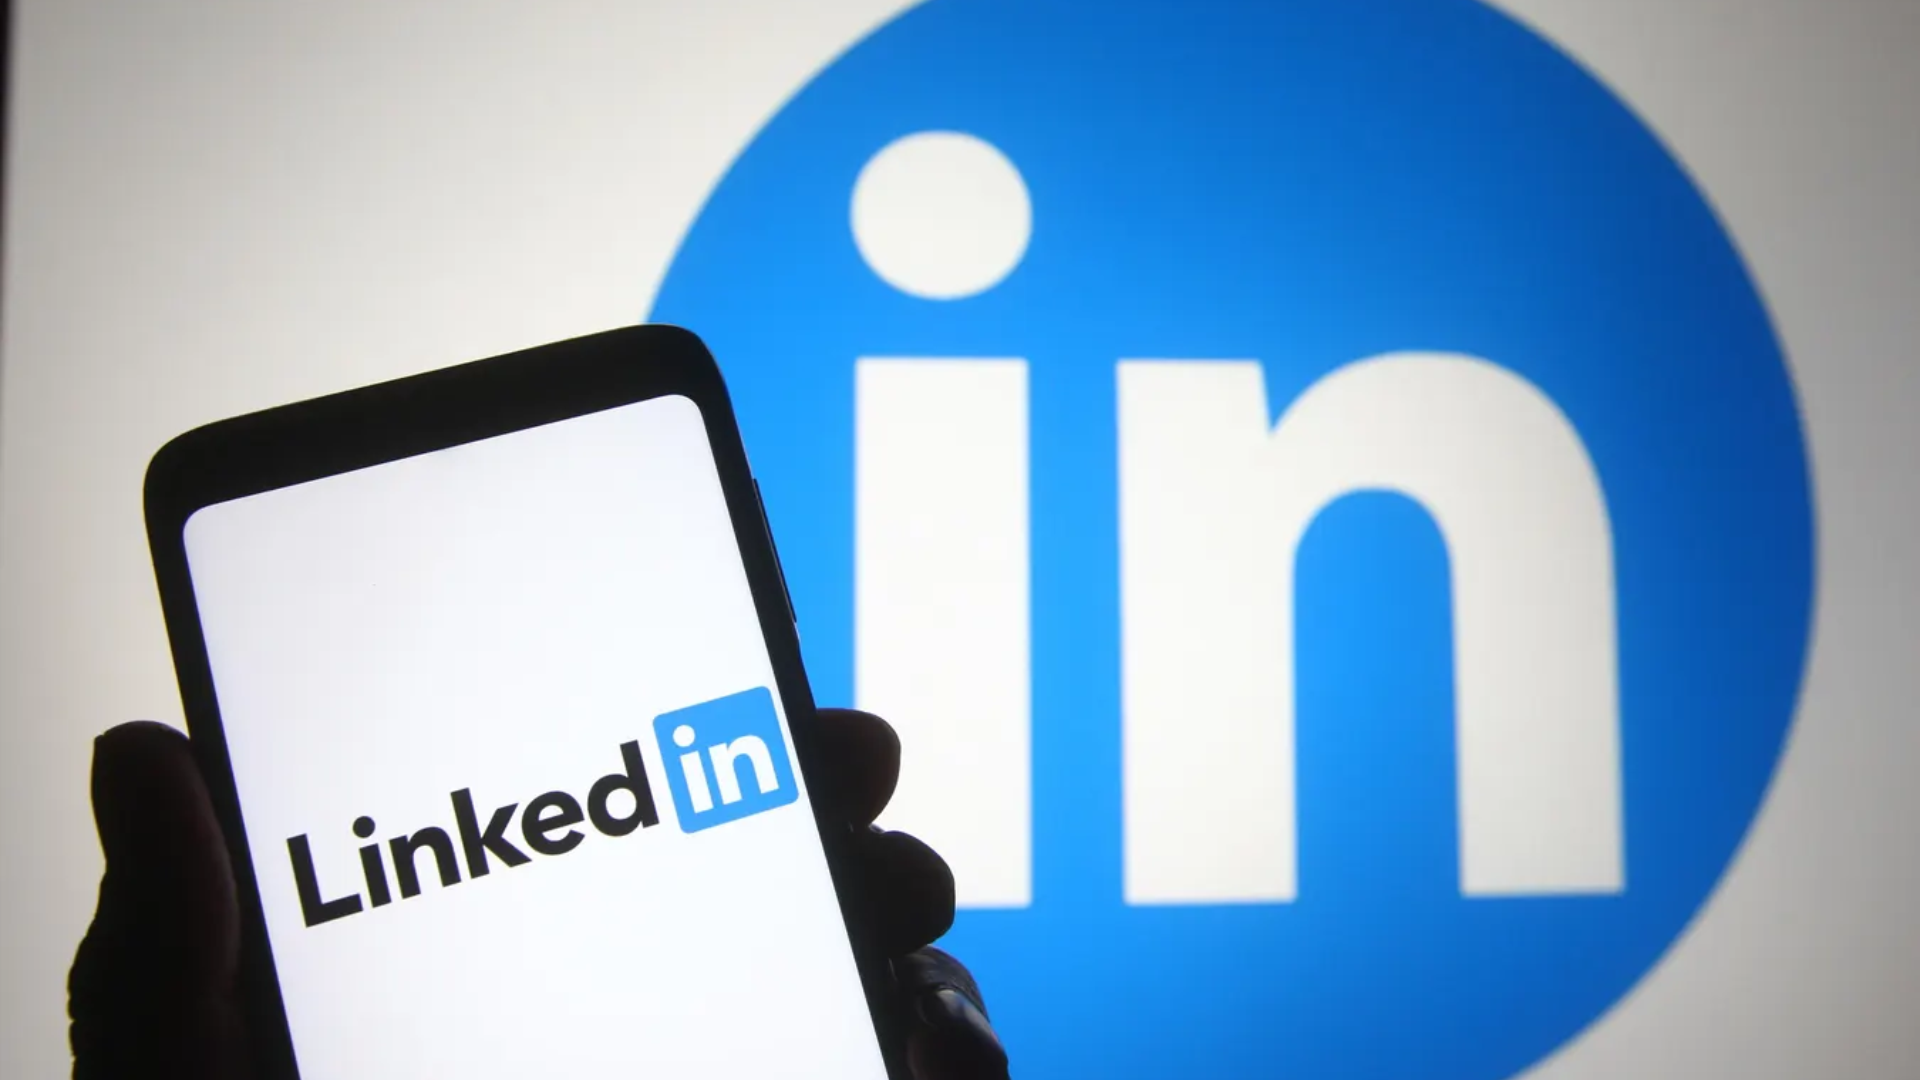 LinkedIn Is Poised To Launch Gaming Features, Allowing Job Seekers To Play Games While Searching For New Opportunities